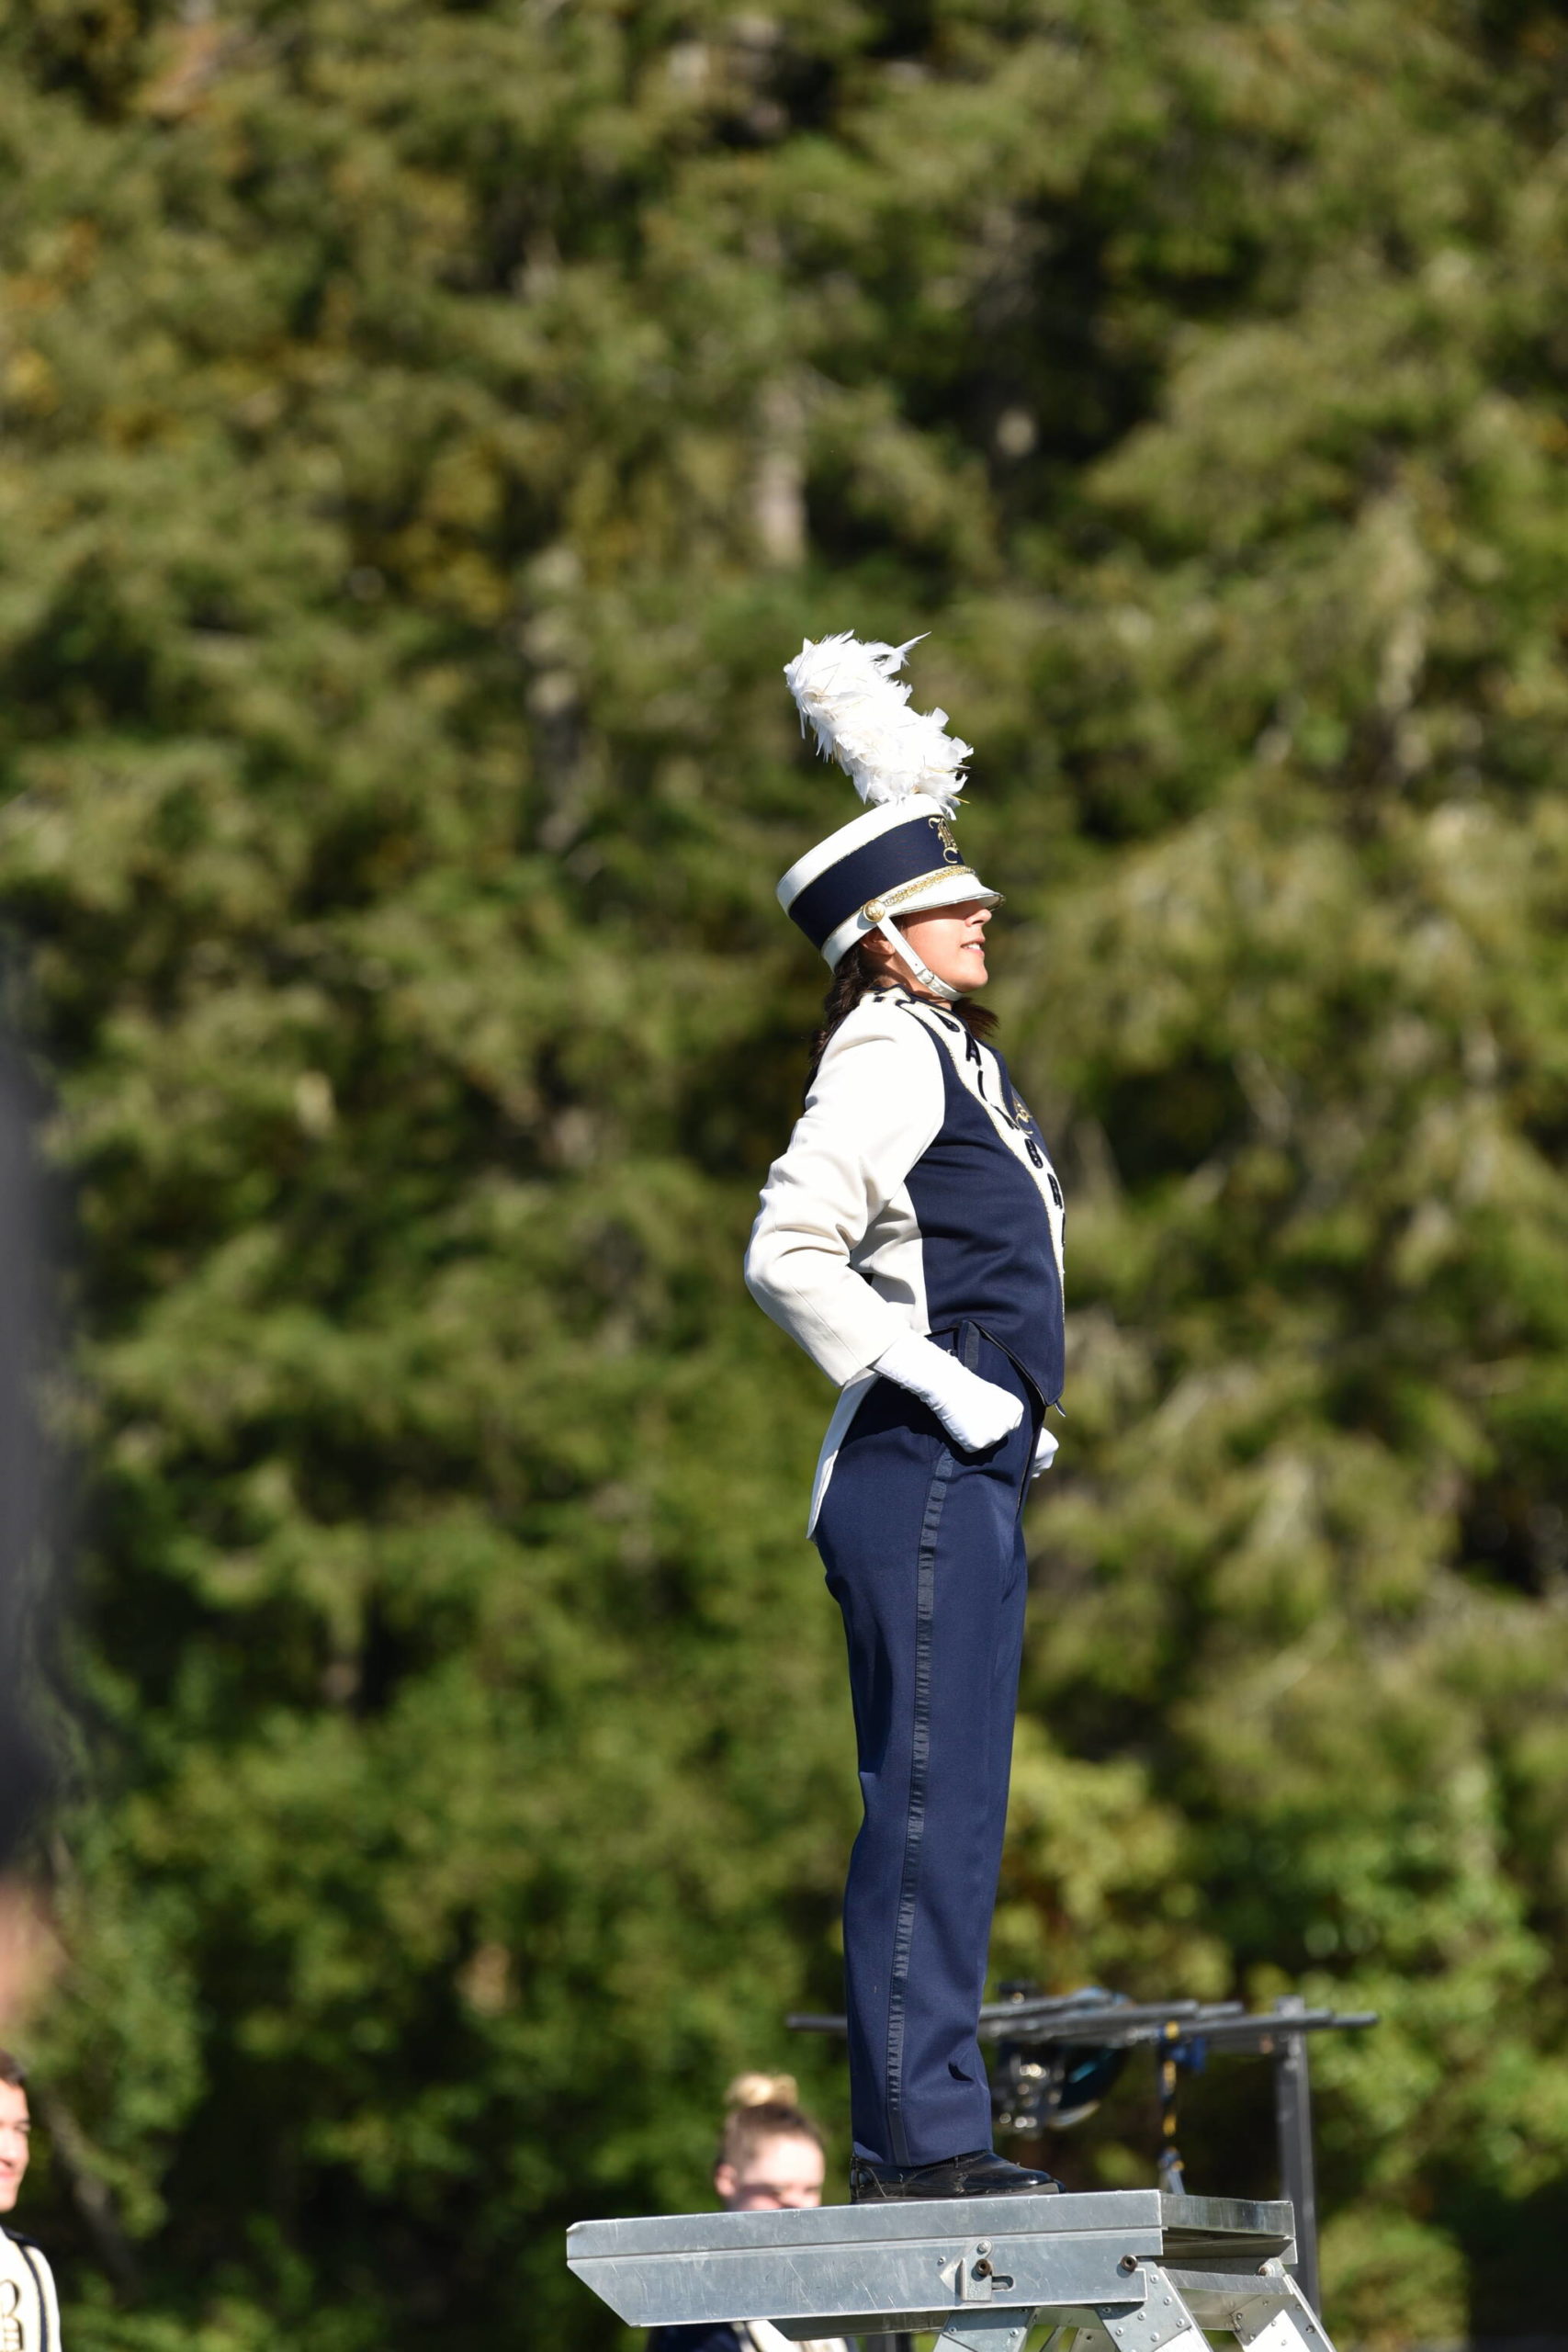 BHS senior Dani Heylen was awarded first place Drum Major and led the Spartan musicians to a second place win overall.